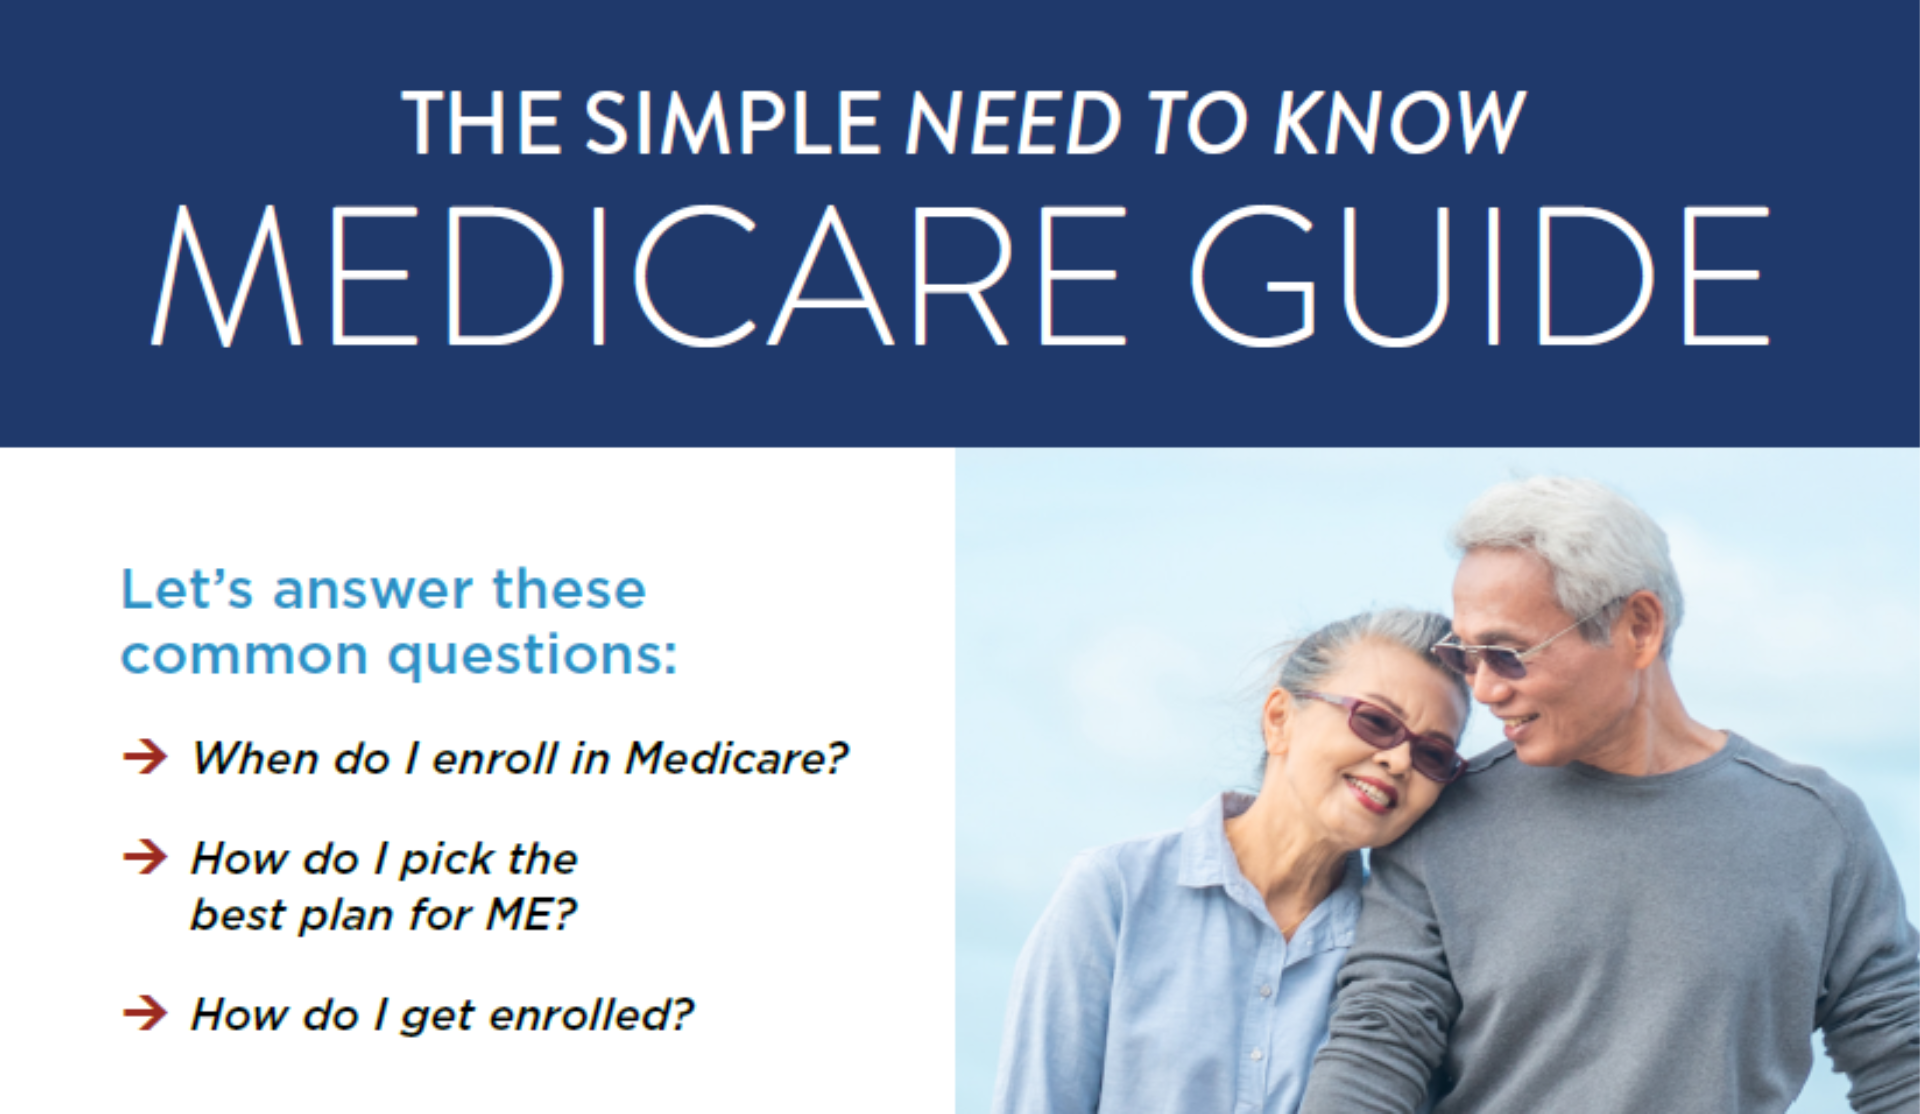 the simple need to know Medicare guide